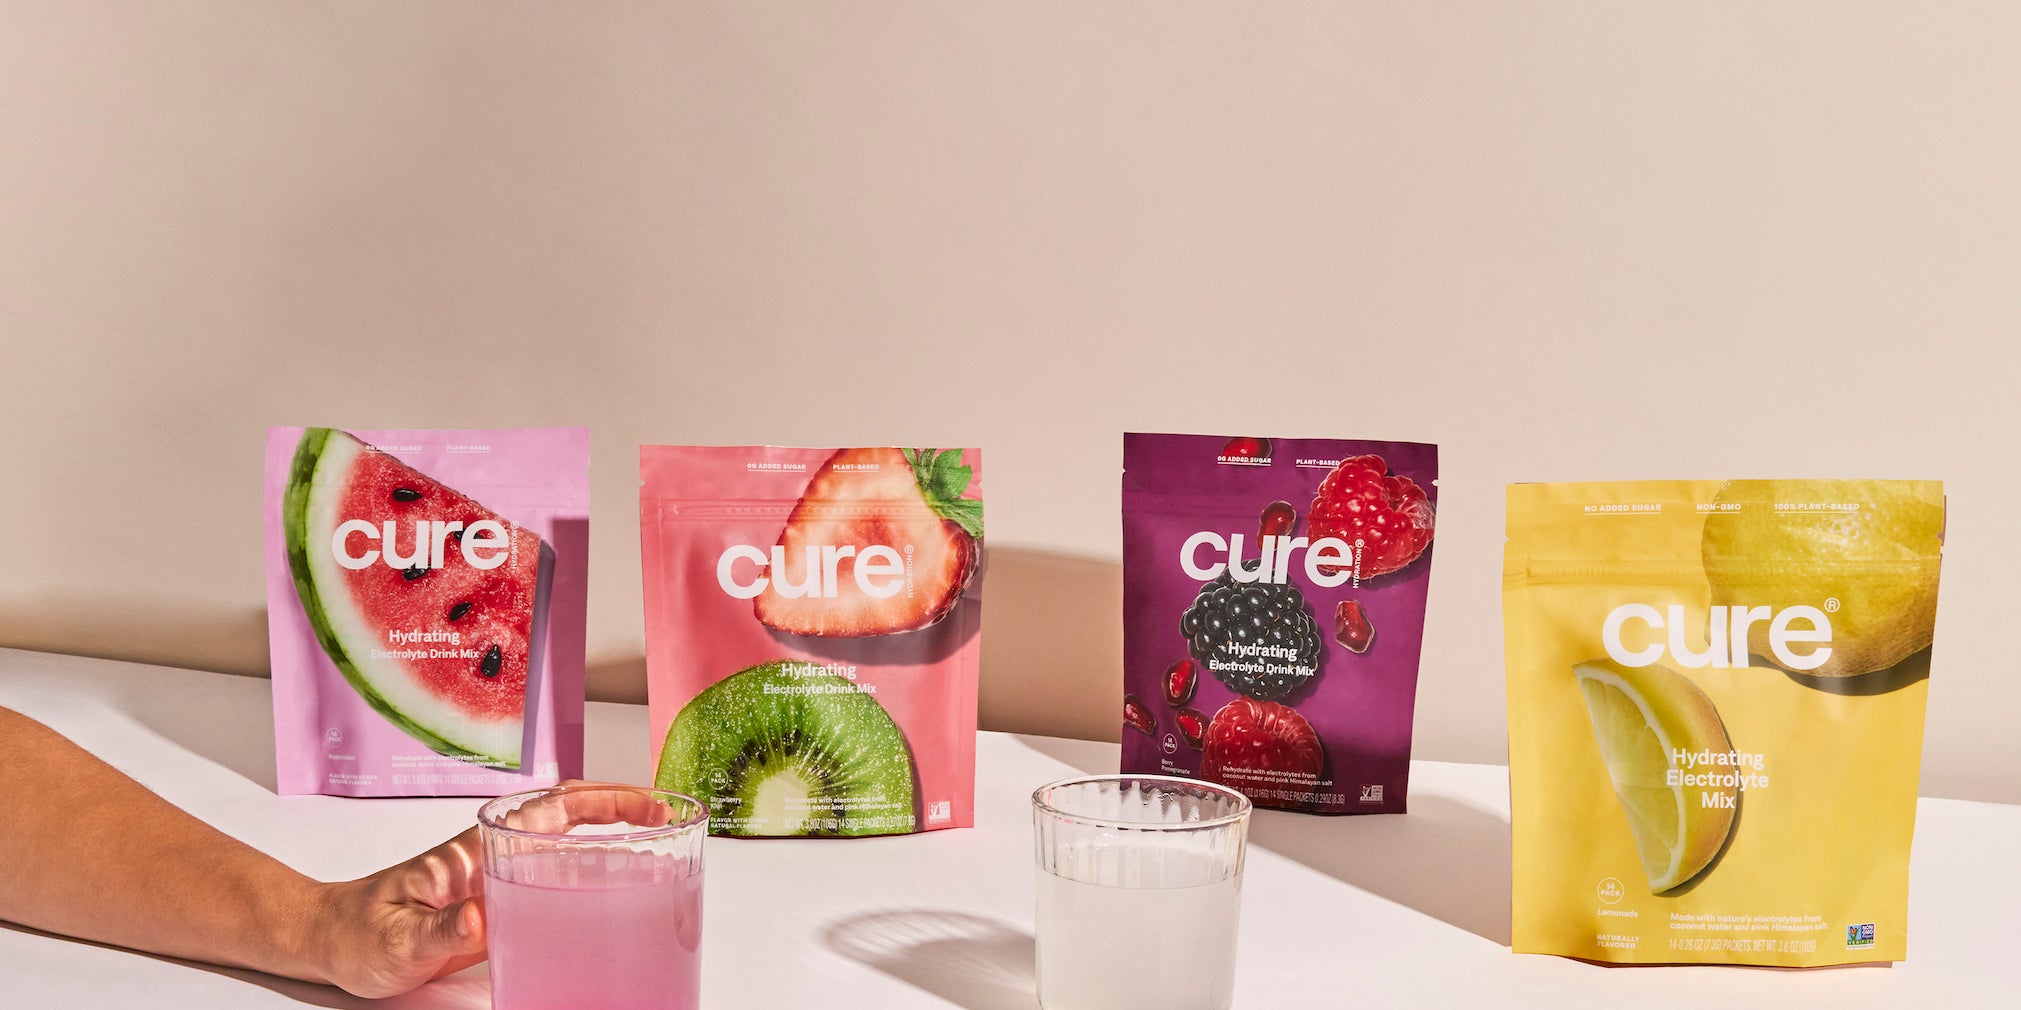 'Cure' mix packets in watermelon, kiwi, berry, lemon flavors on a table.